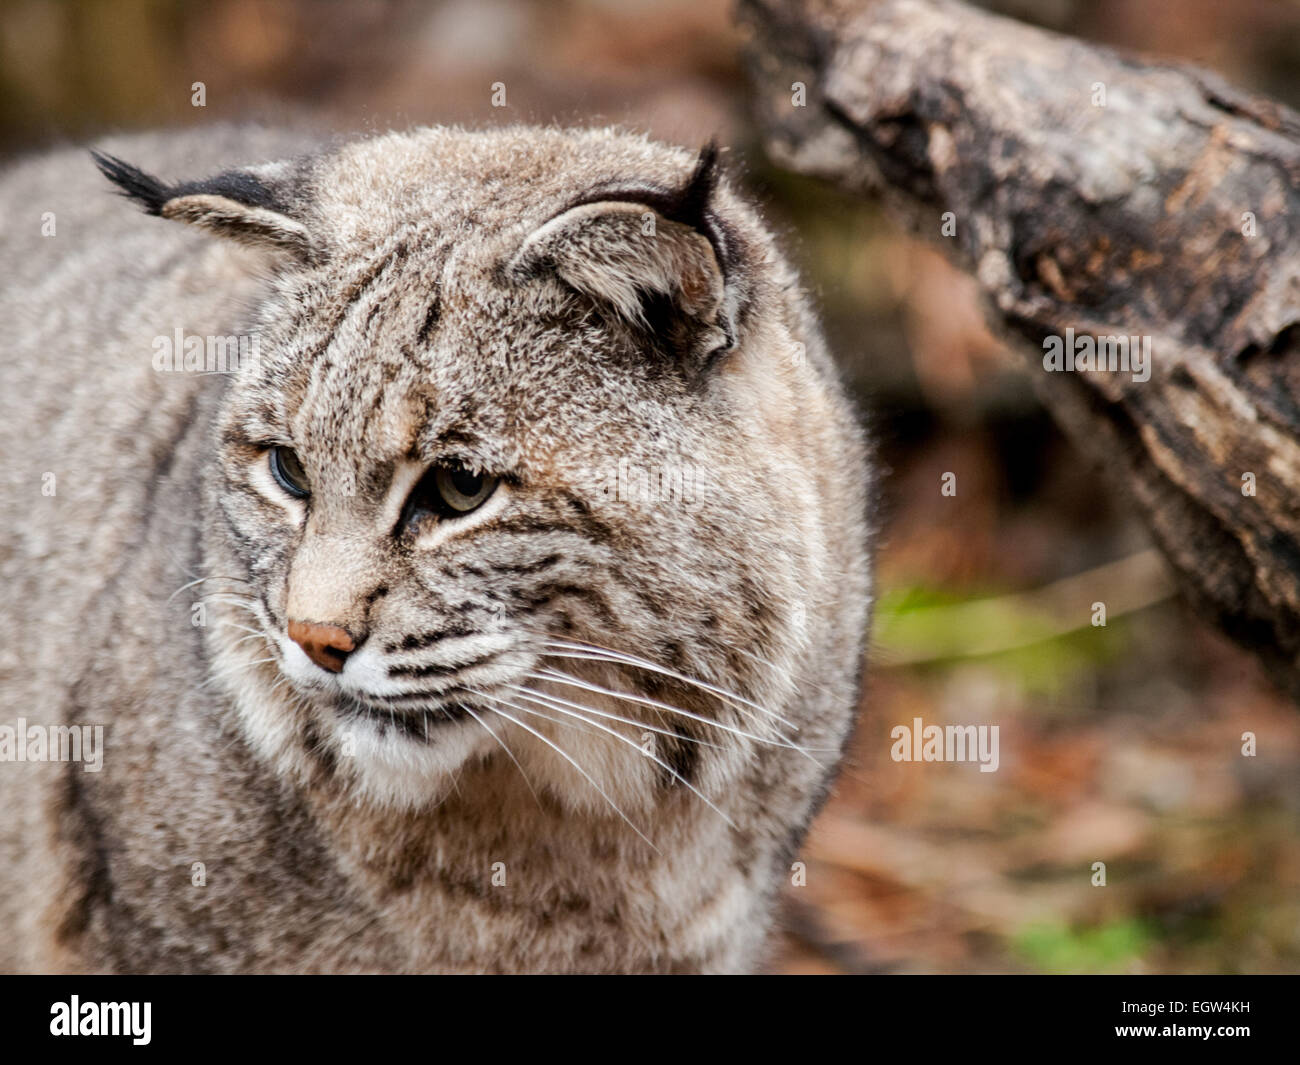 Bobcat Lynx Rufus Is A North American Mammal Of The Cat Family Stock Photo Alamy